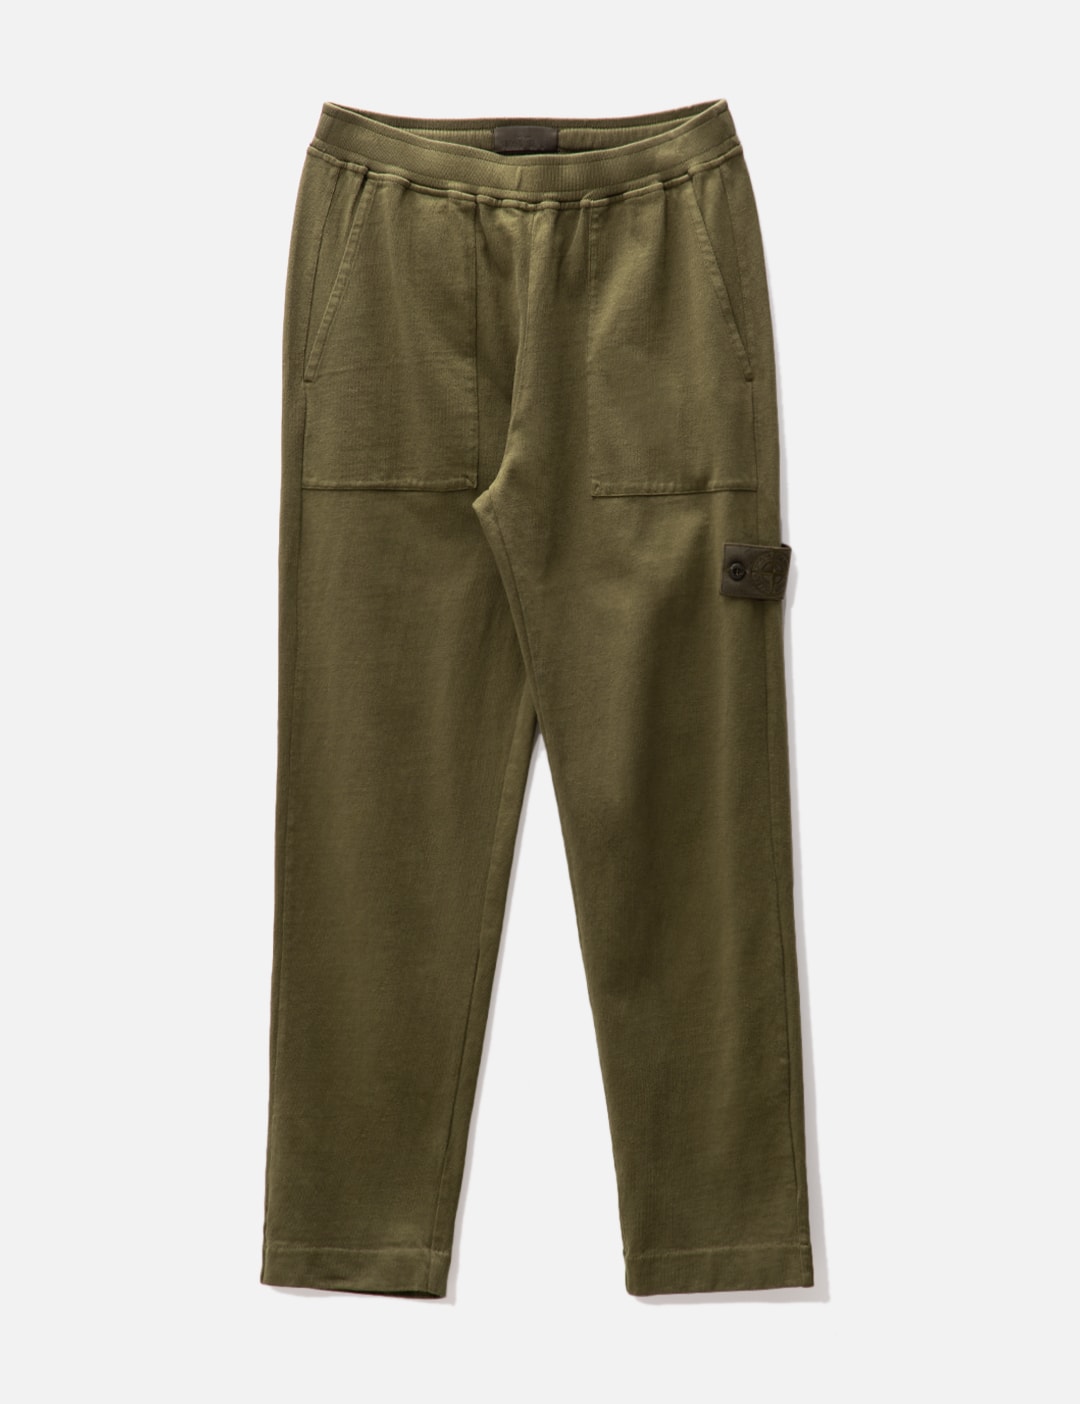 Stone Island - Ghost Piece Sweatpants | HBX - Globally Curated Fashion ...